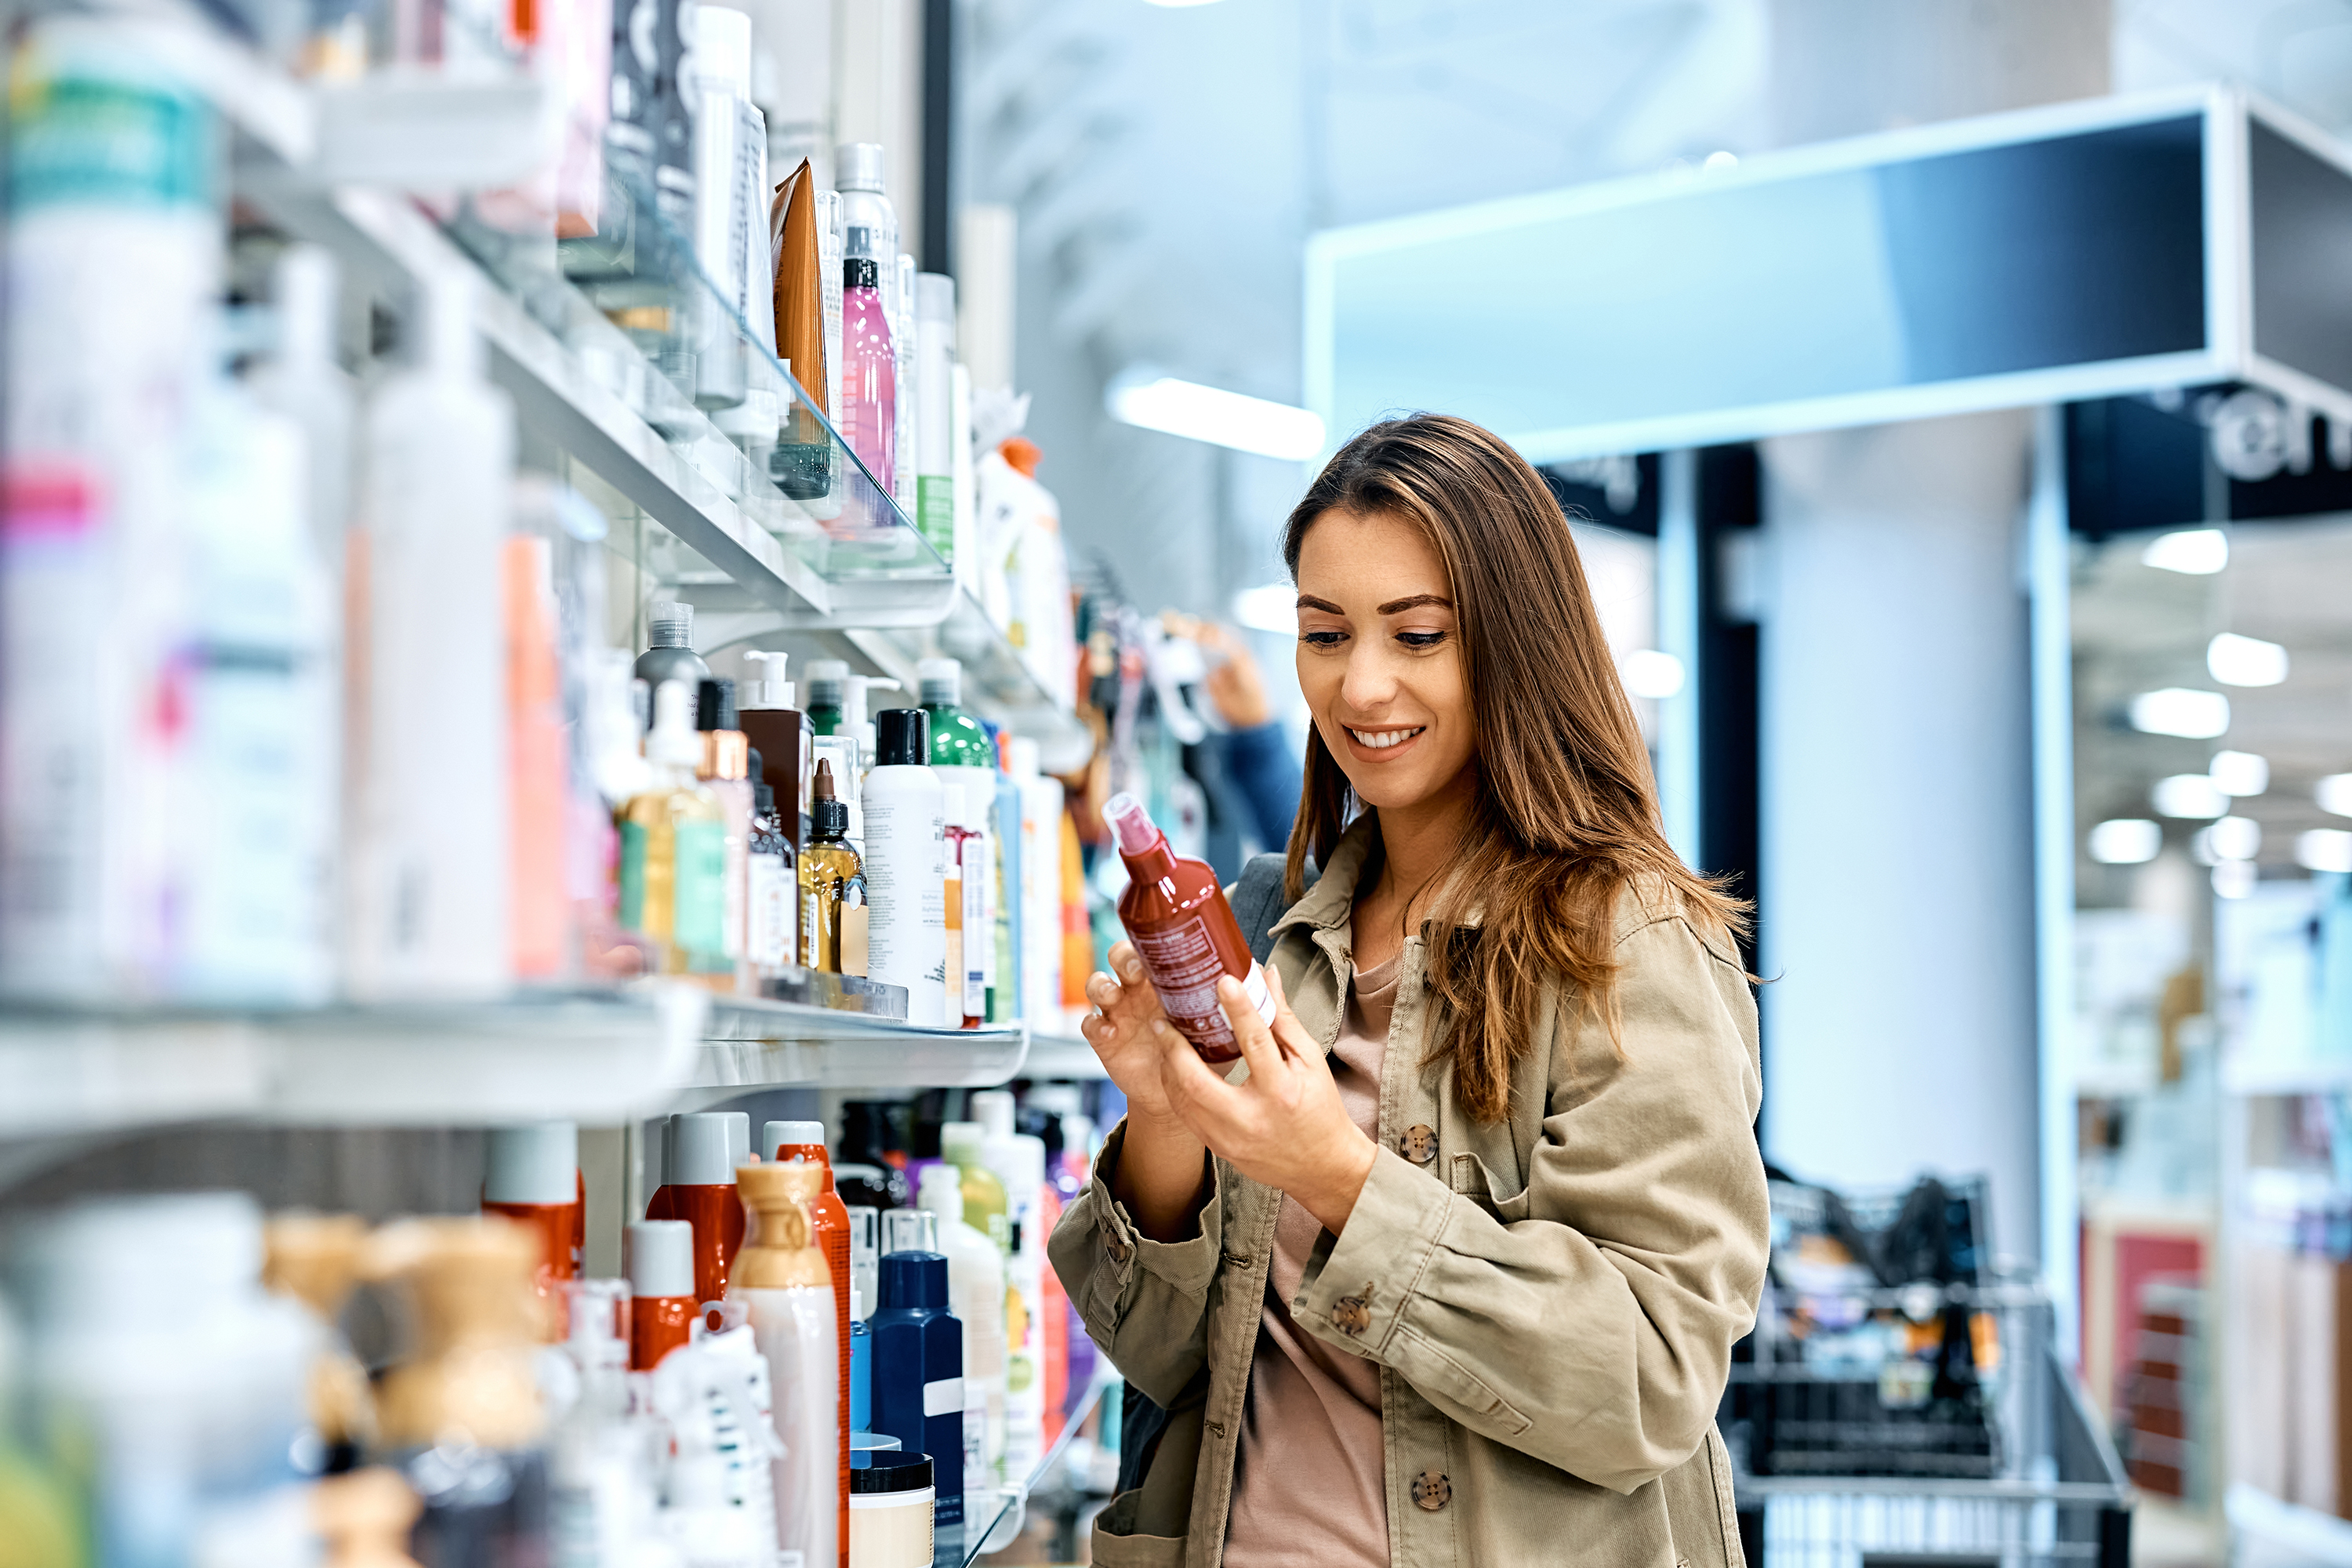 Smiling woman examining a hair product in a store aisle, searching for cruelty-free beauty options.